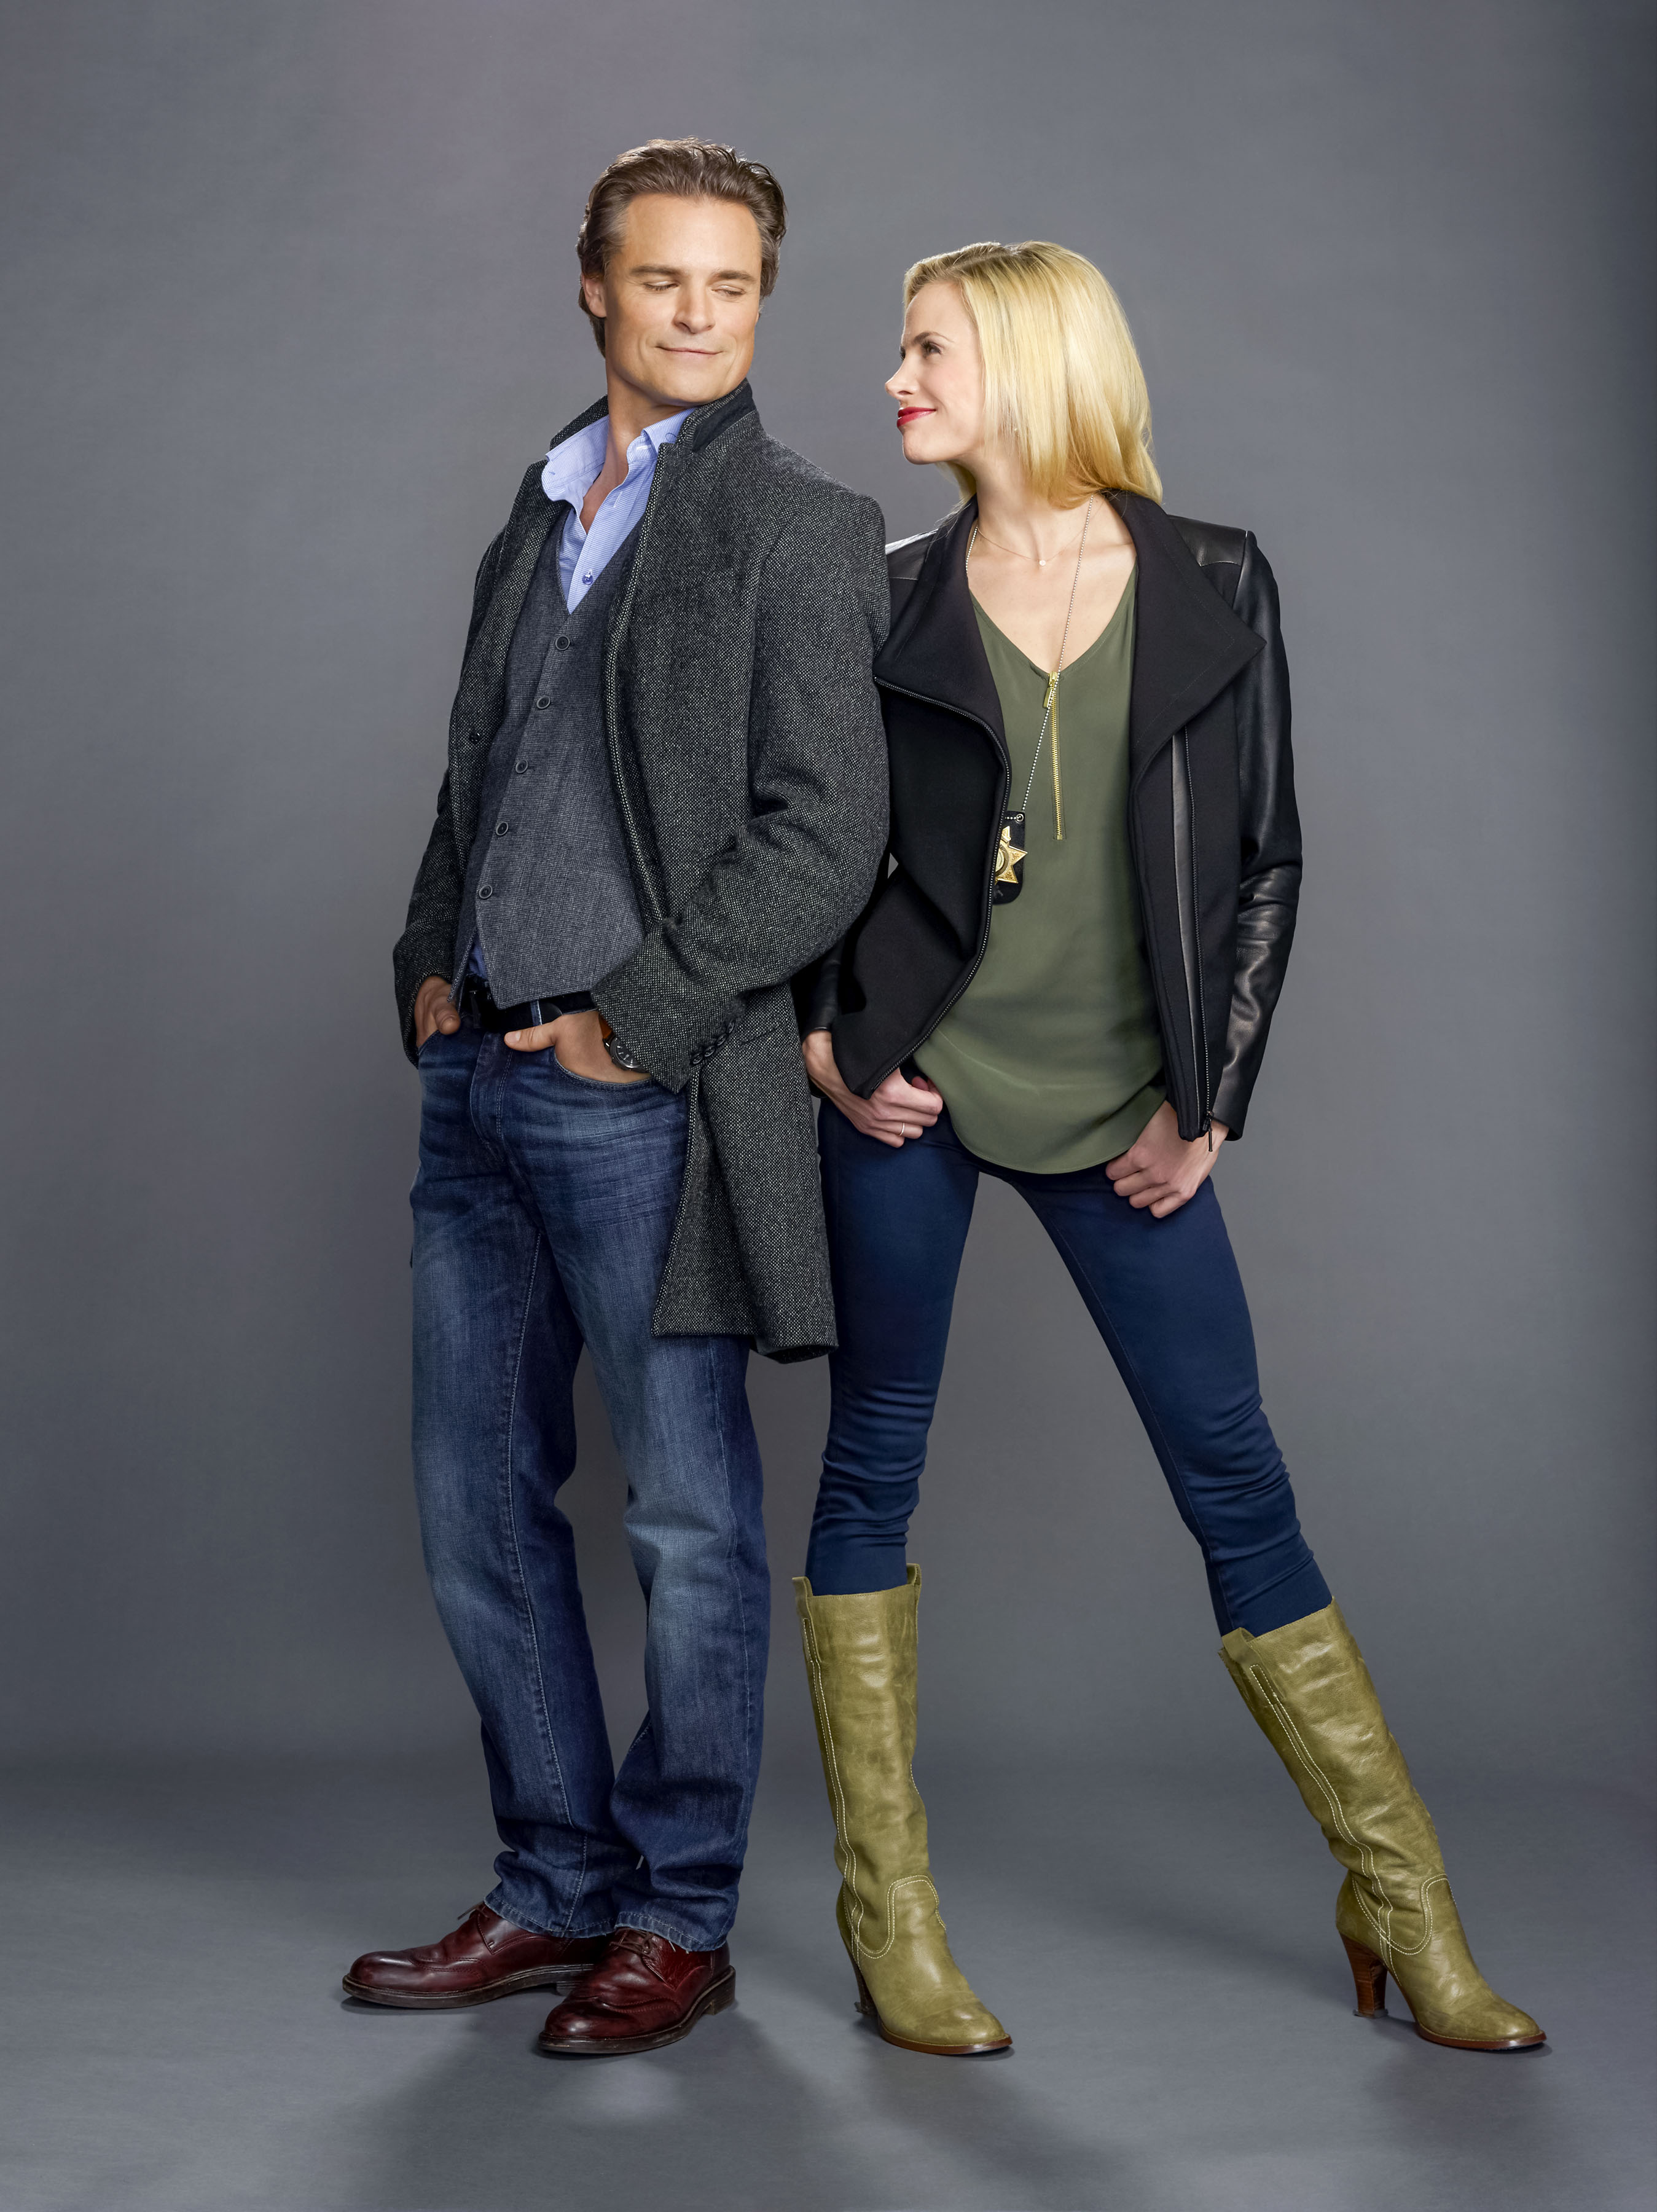 Dylan Neal and Brooke Burns as Henry Ross and Maggie Price in Gourmet Detective